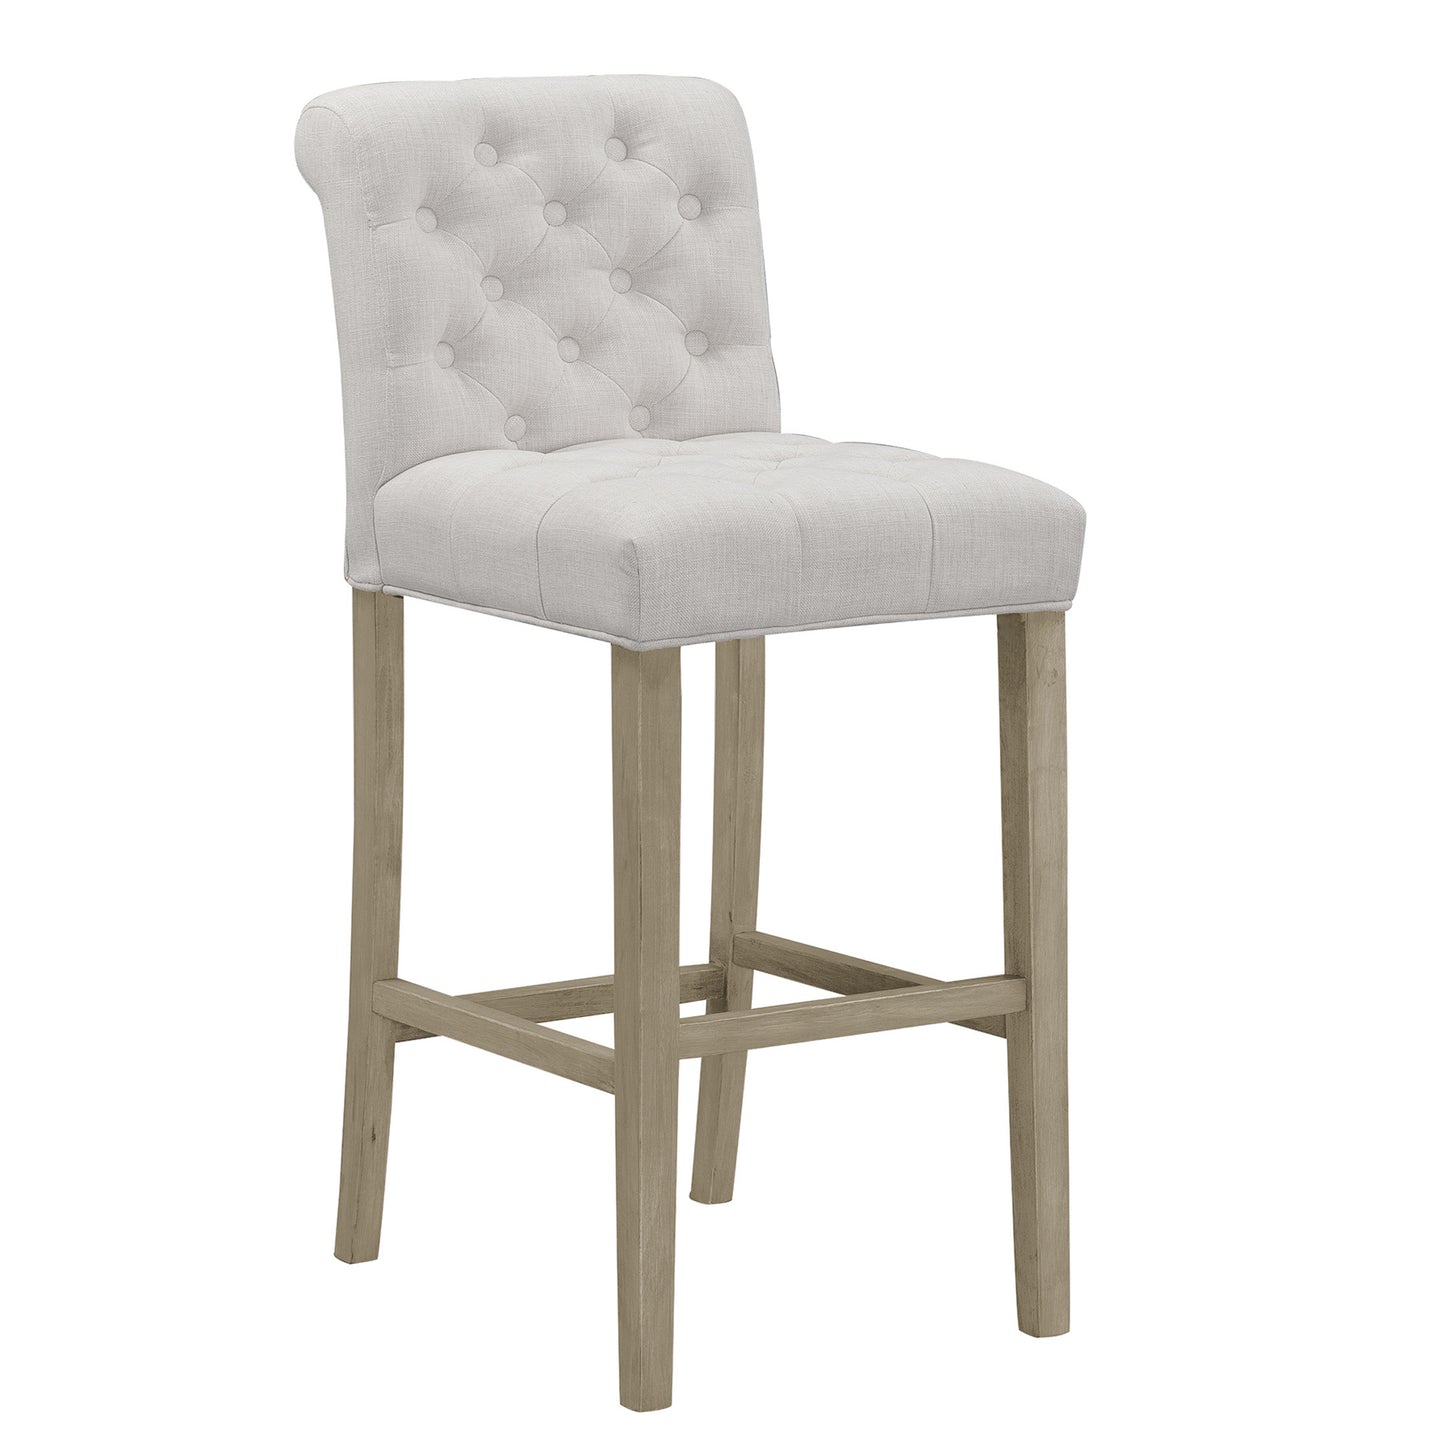 Set of 2 Aleen Beige Fabric Bar Stool with Roll Back Design and Tufted Buttons